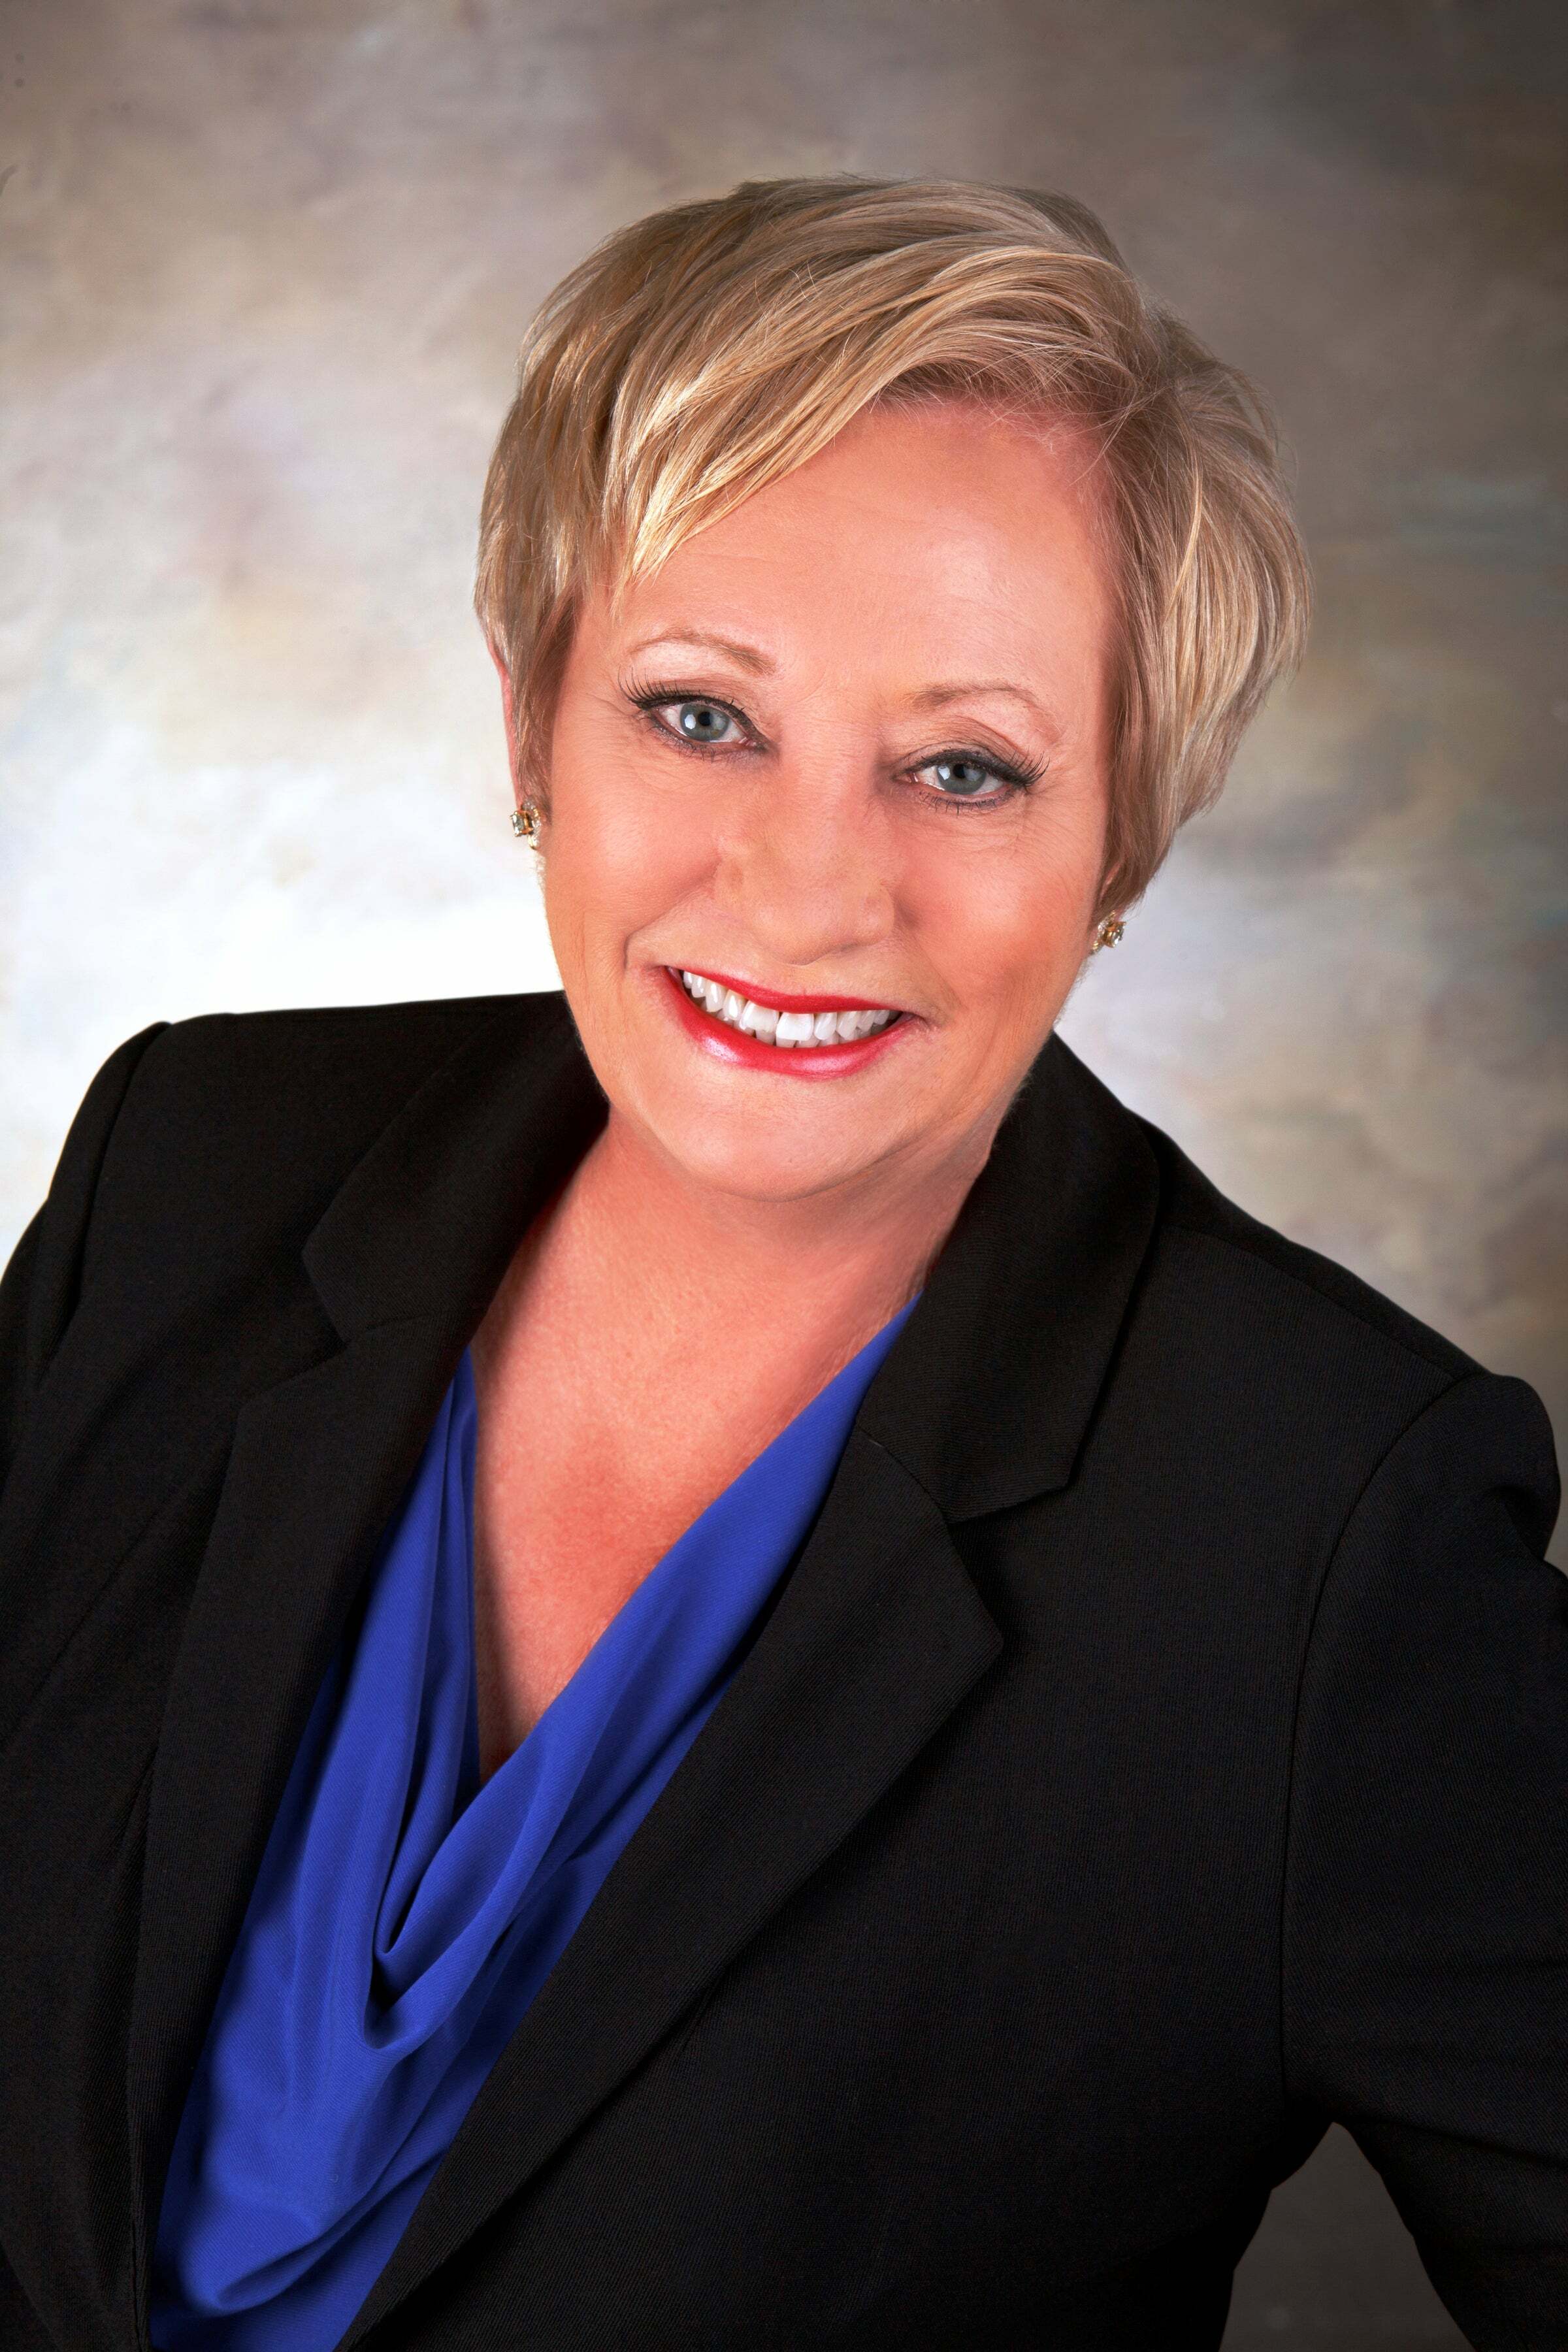 Mollie Powell, Real Estate Salesperson in Cape Coral, ERA Real Solutions Realty